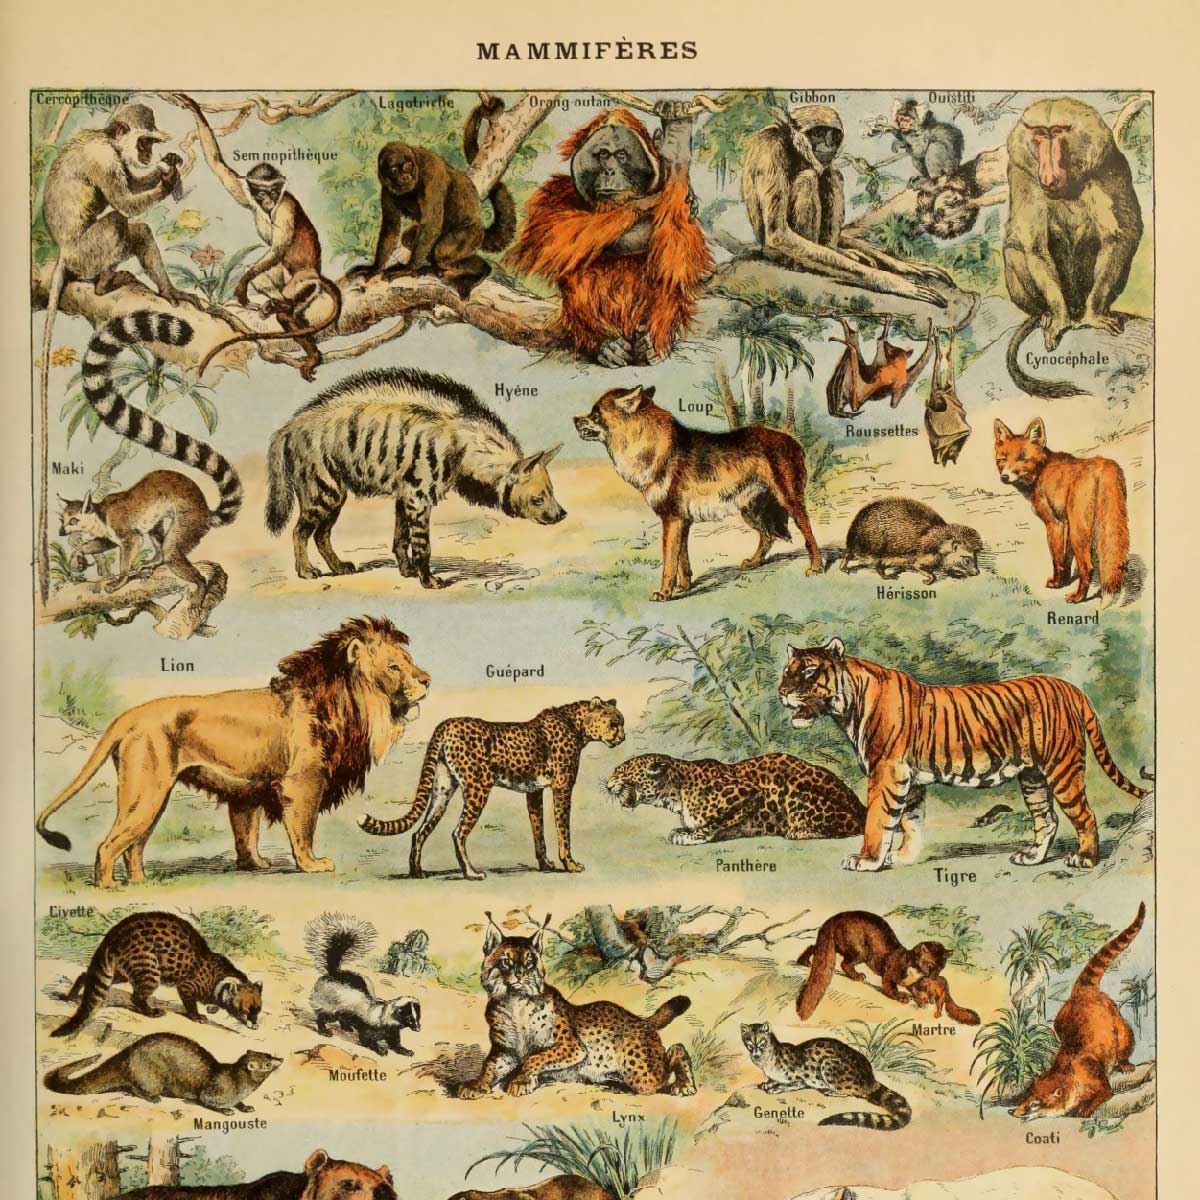 close up view of drawings of wildlife mammals. vintage-style tapestry